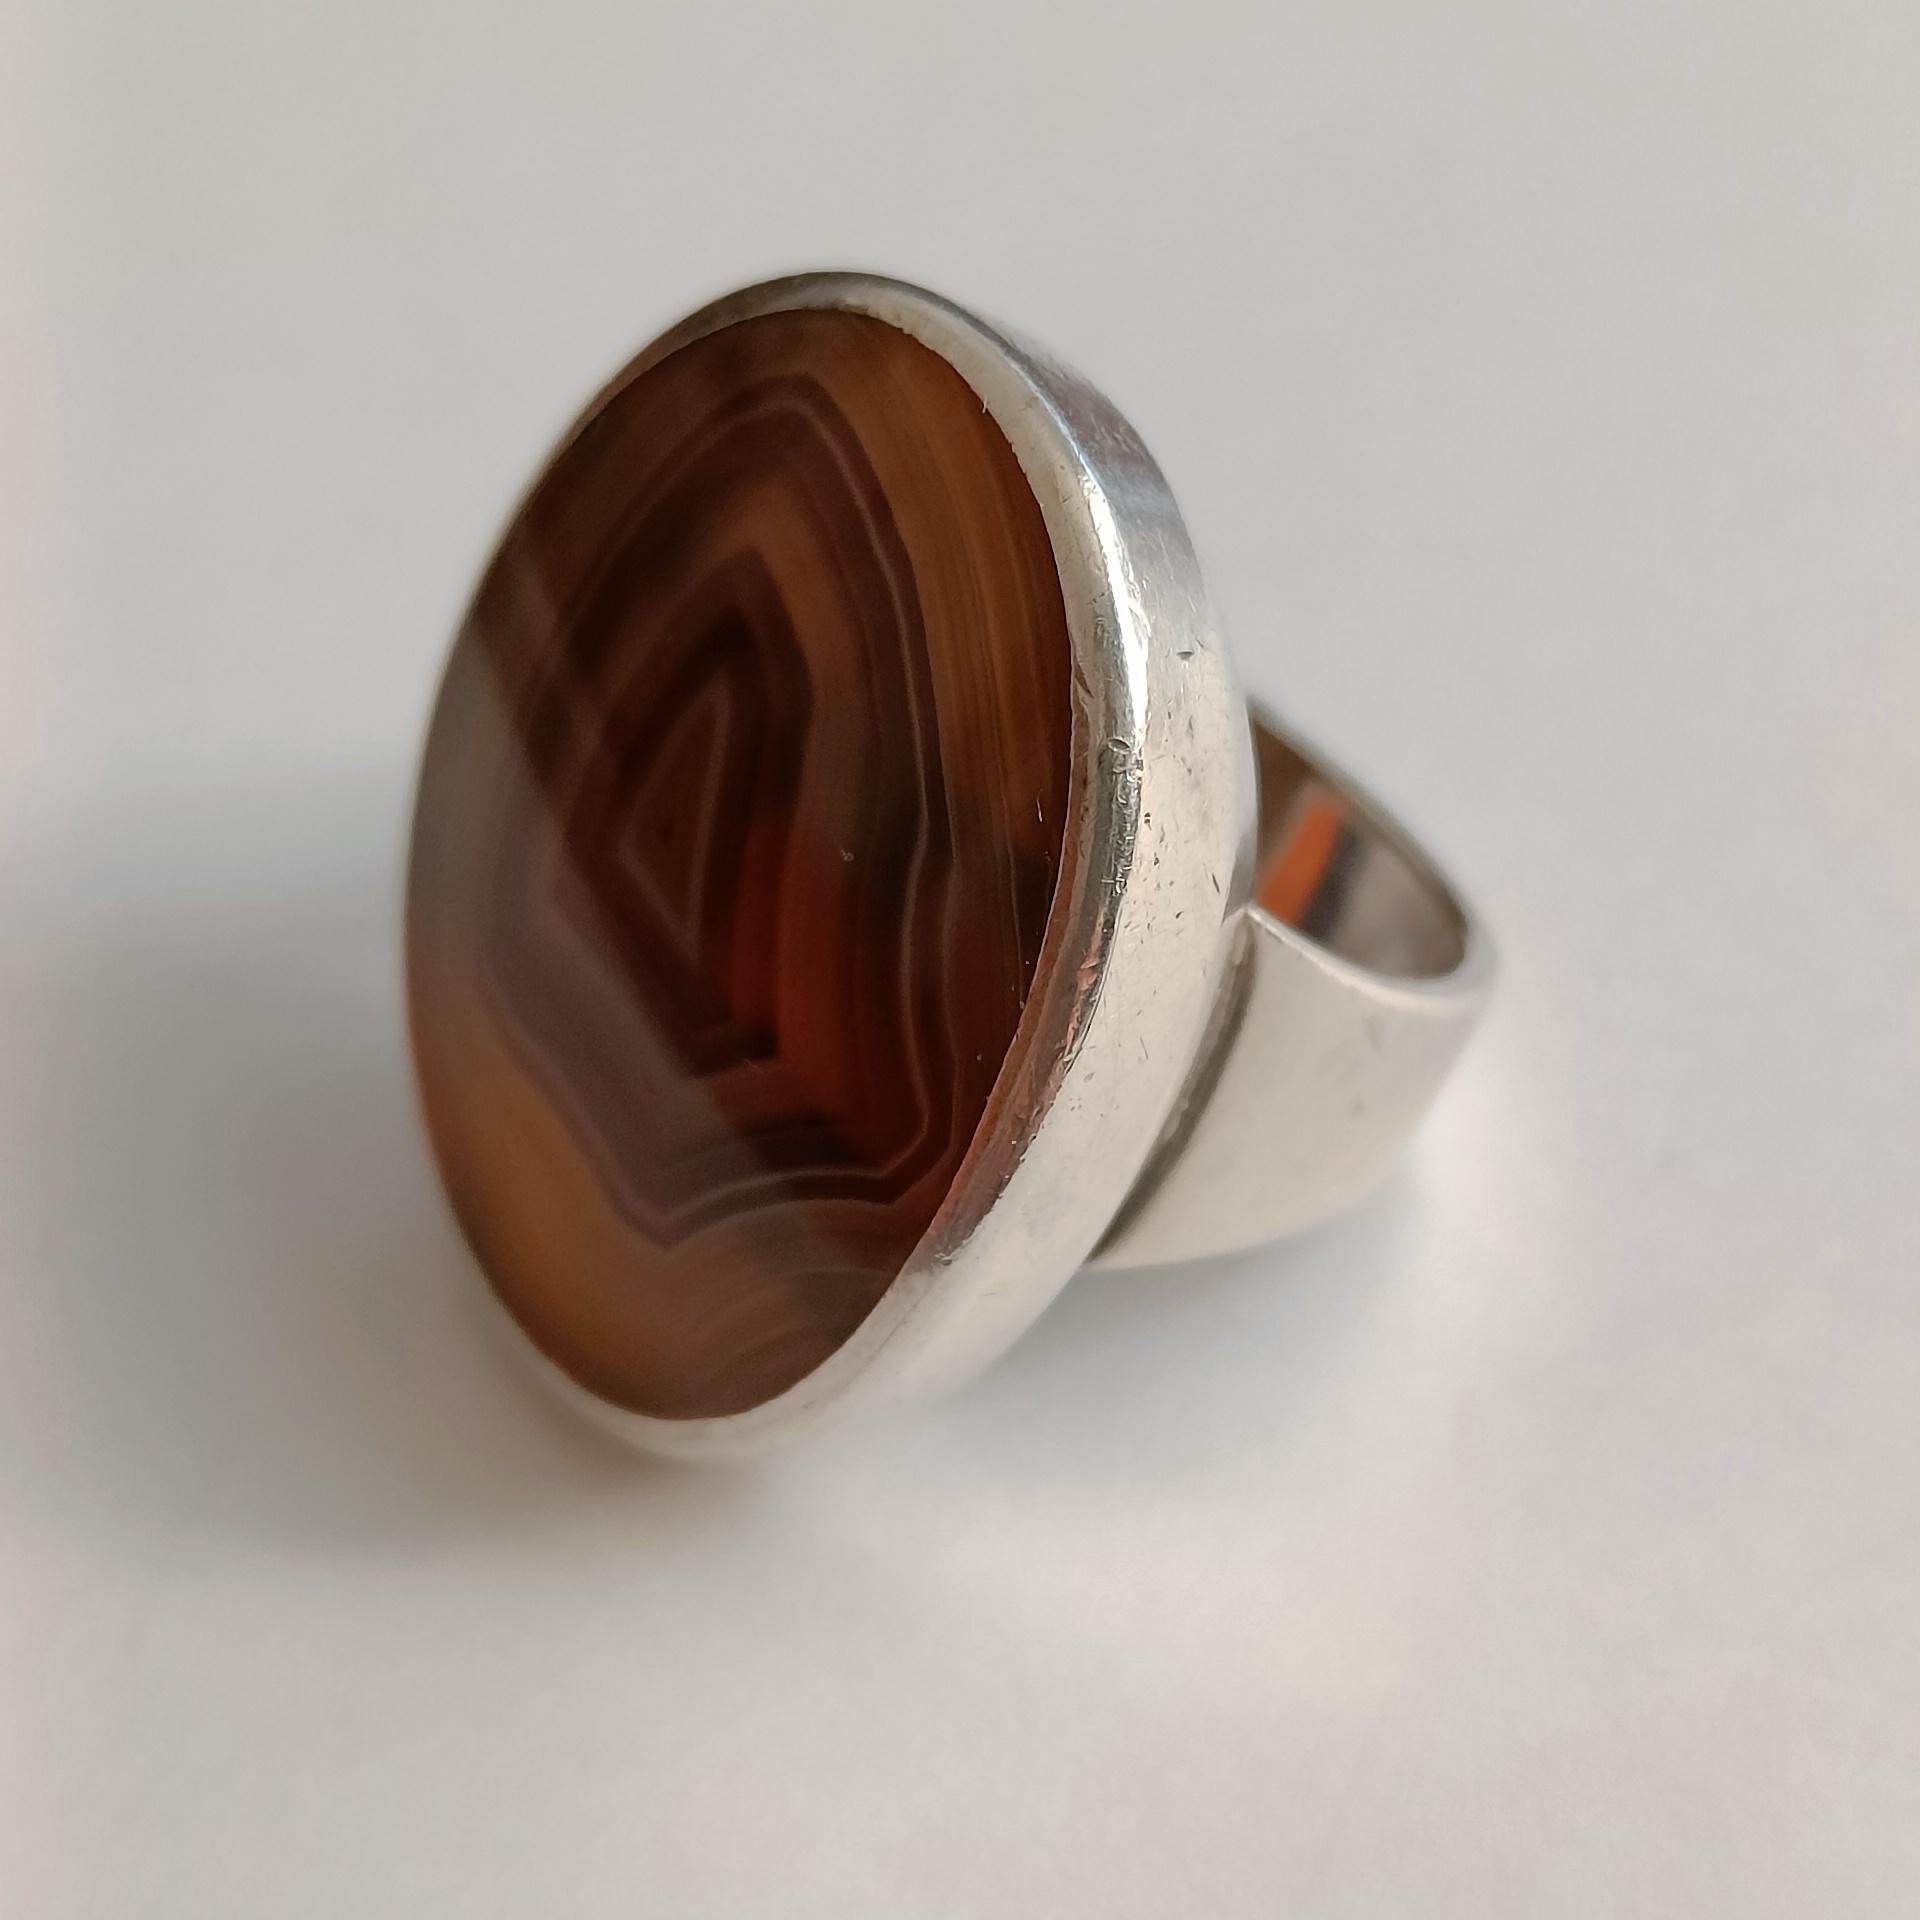 Modernist Wiwen Nilsson Silver Men Ring with Flat Cut Agate - Lund, Sweden 1949 For Sale